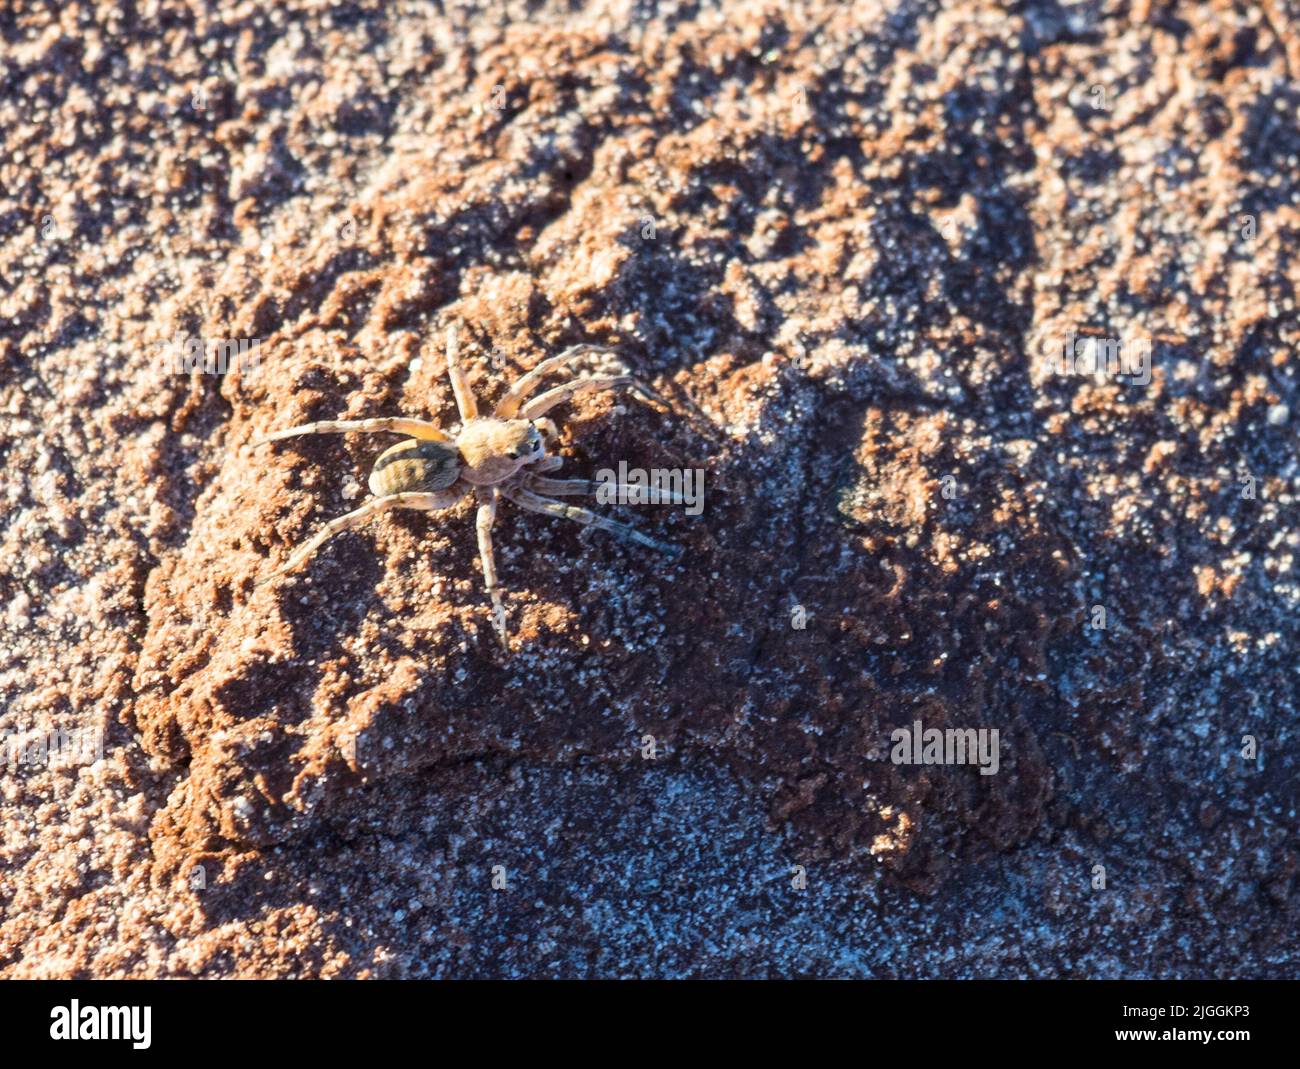 Wolf Spider (Tetralycosa alteripa?) on a small crest of mud in the dry salt bed of Lake Ballard, Western Australia. Stock Photo